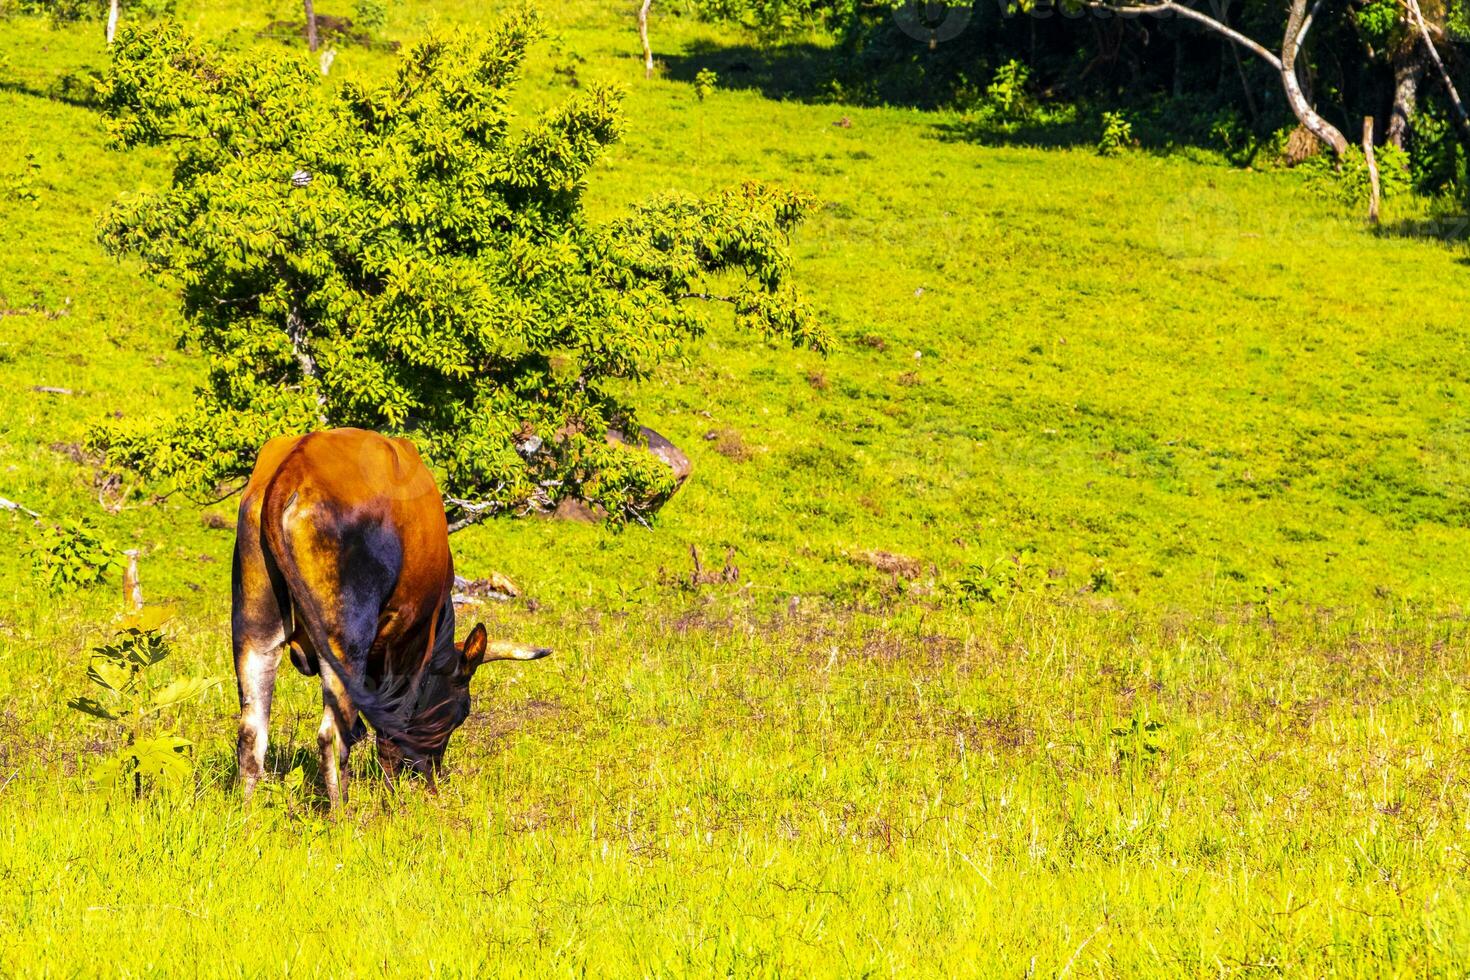 Cows grazing on pasture in the mountains forests Costa Rica. photo